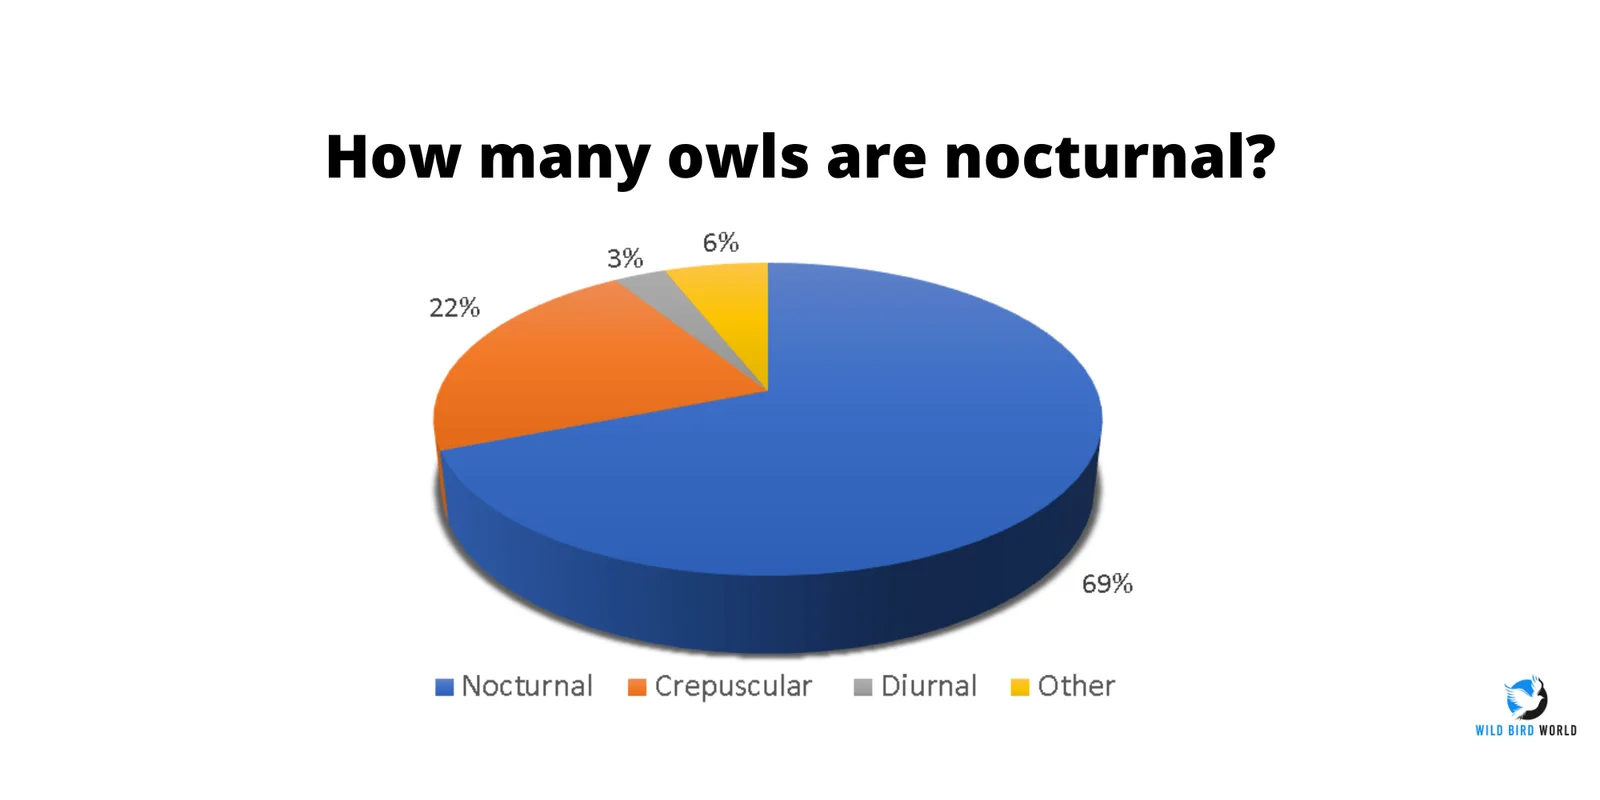 how many owls are nocturnal?